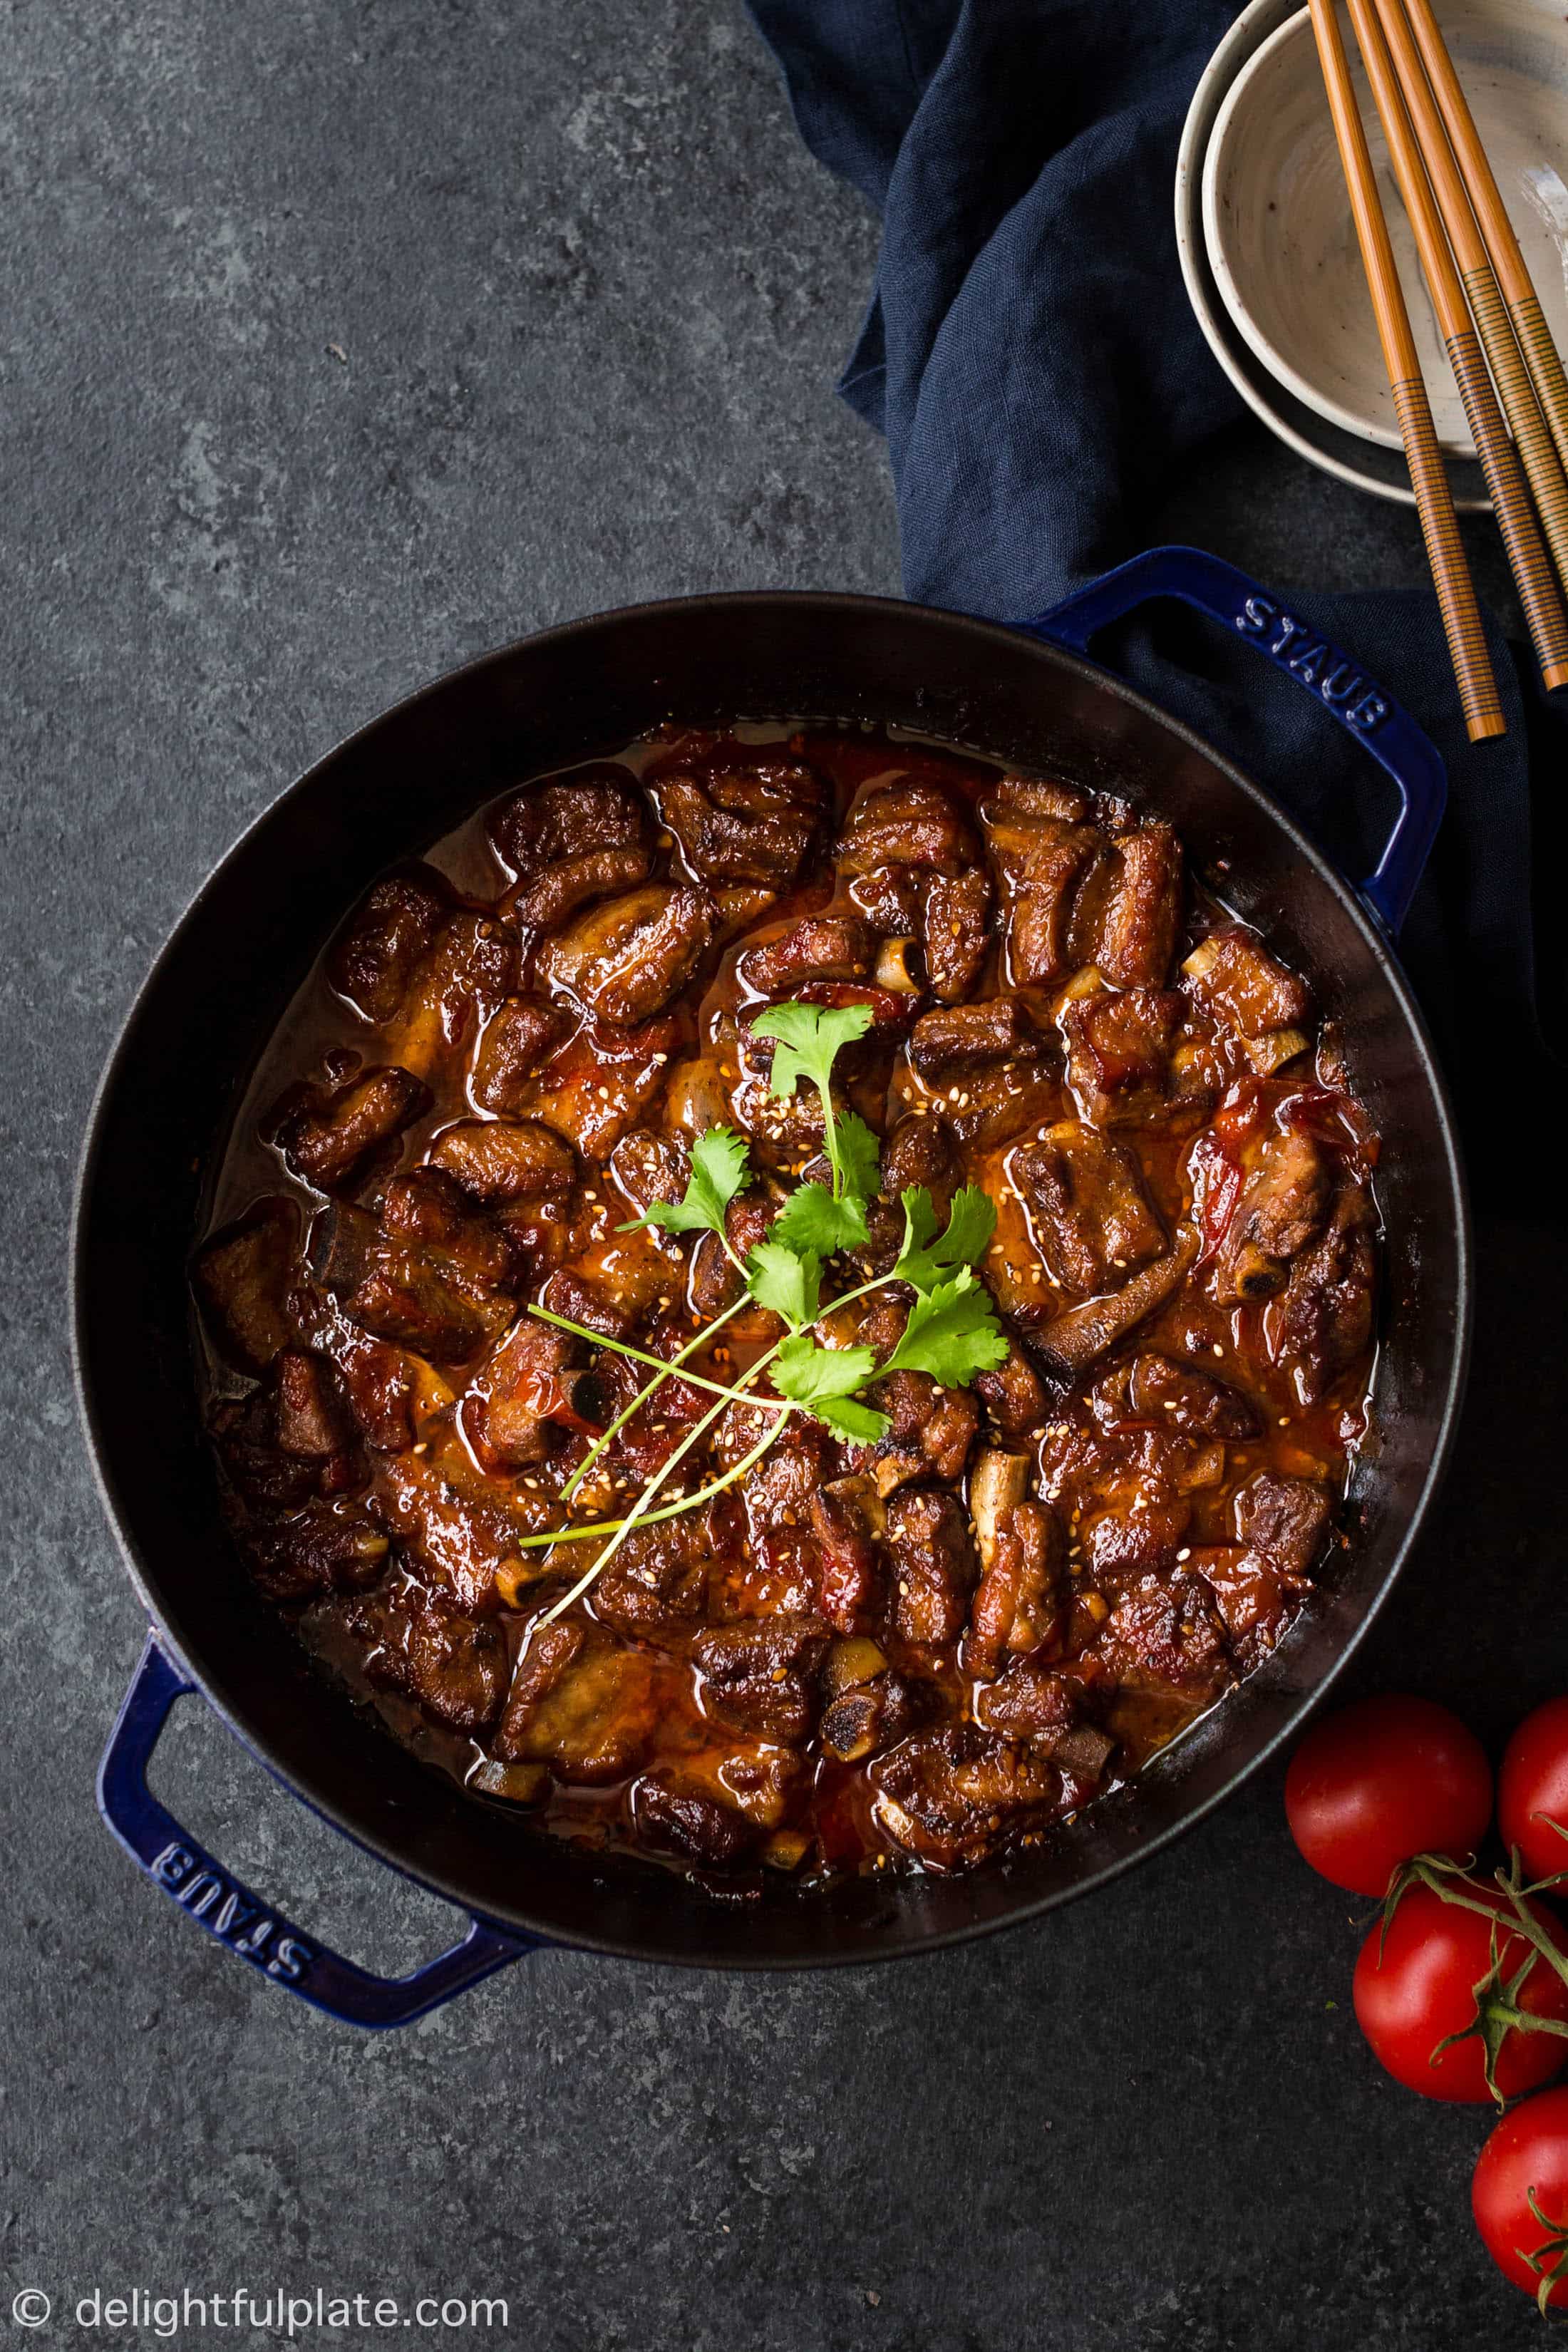 Vietnamese Sweet and Sour Pork Ribs (Suon Xao Chua Ngot) is a popular dish in Northern Vietnam. It features tender ribs coated with a delicious sweet and sour sauce.